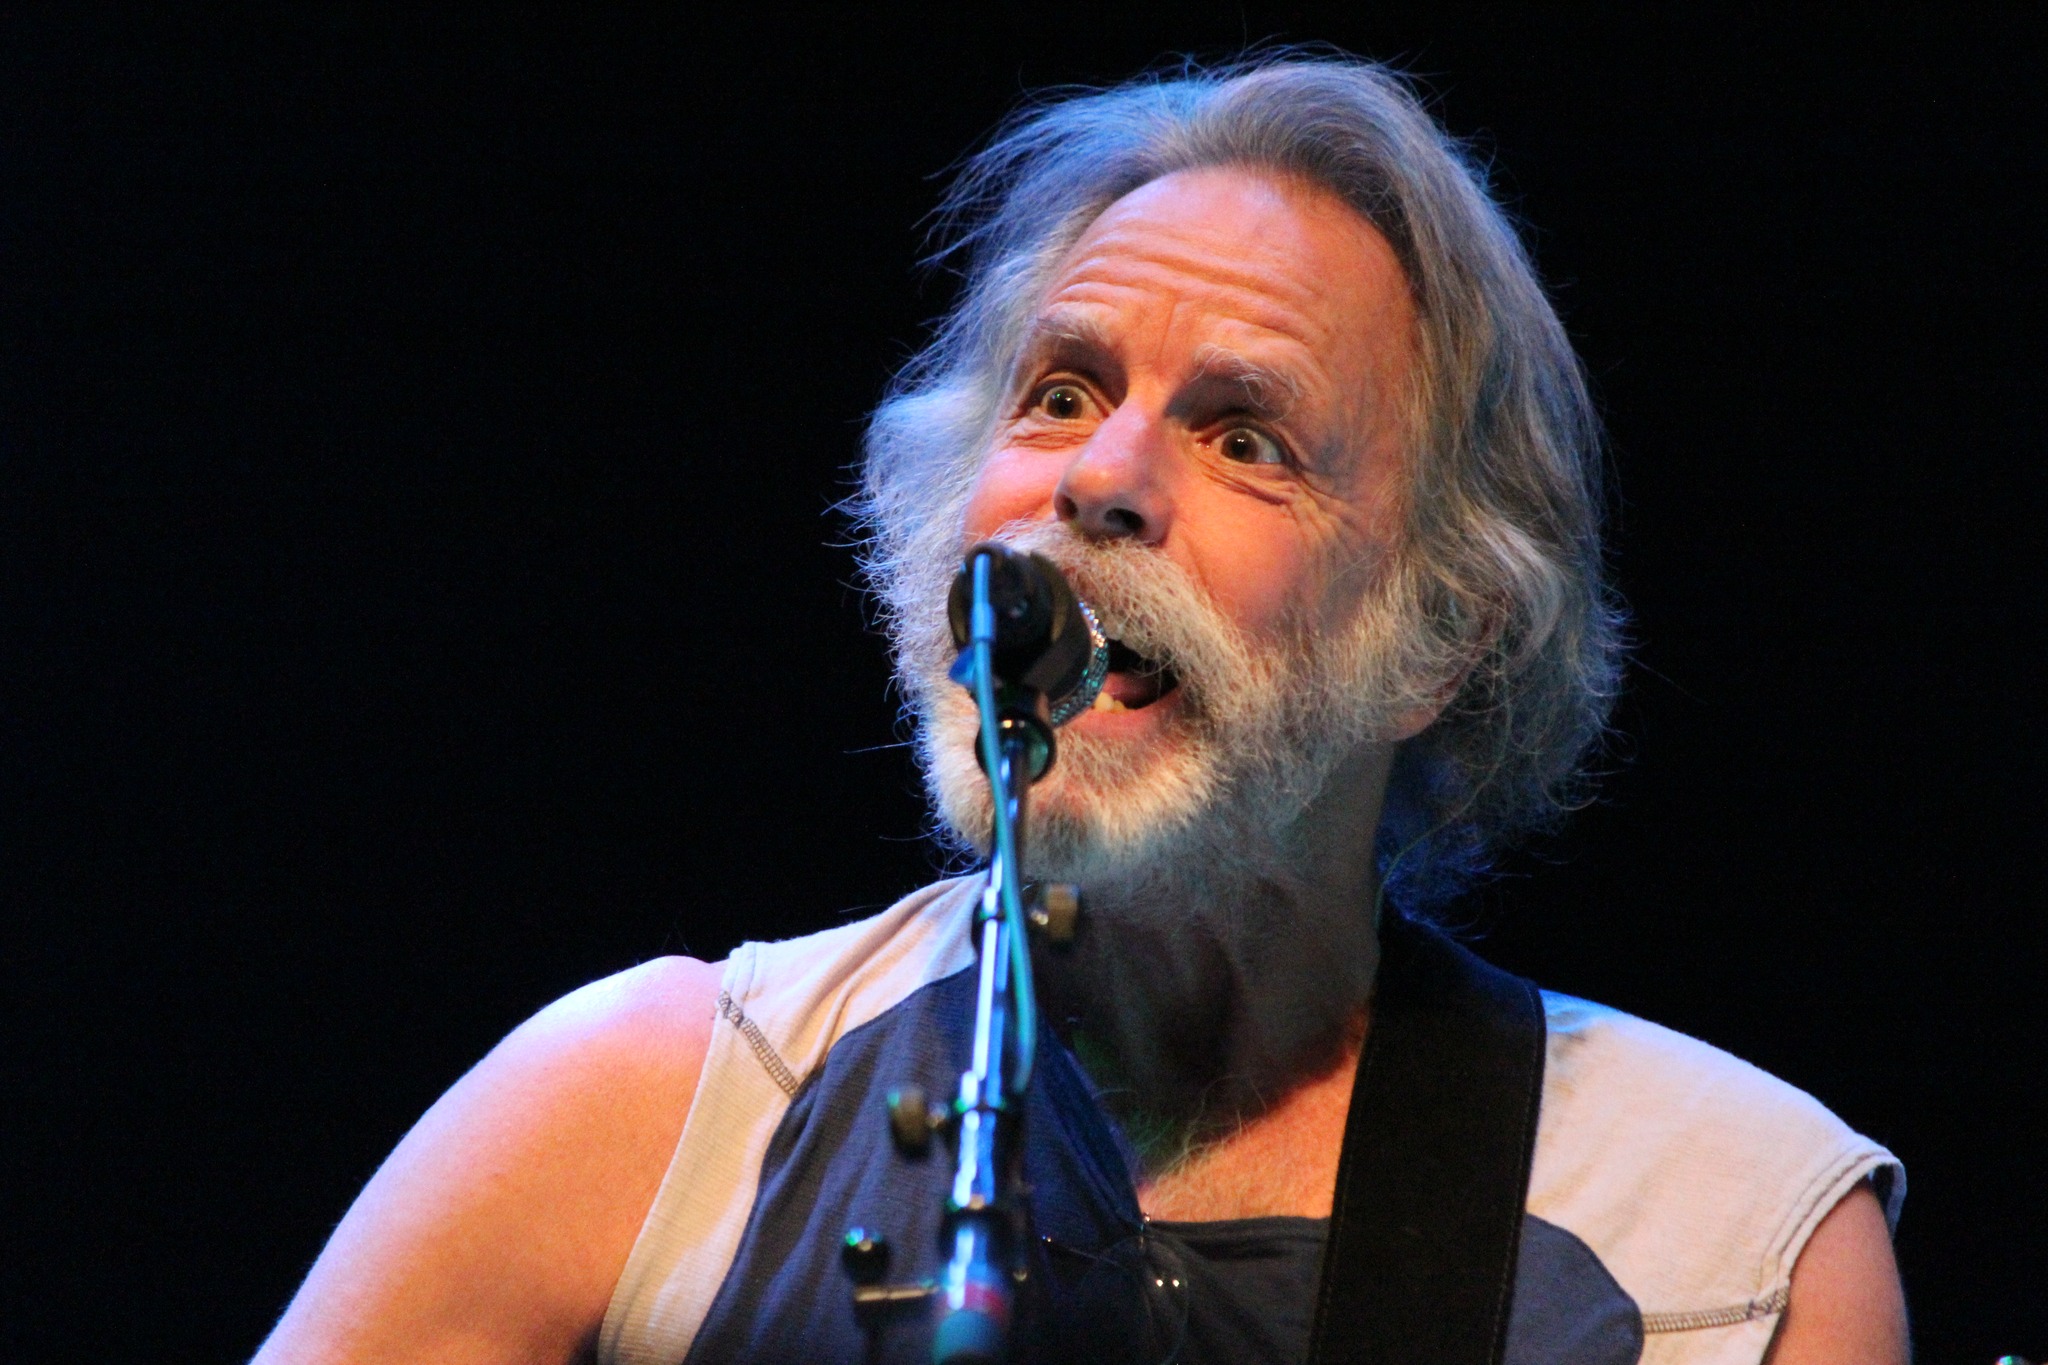 76 Tunes and Still Jamming: The Weir-dly Wonderful World of Bobby!